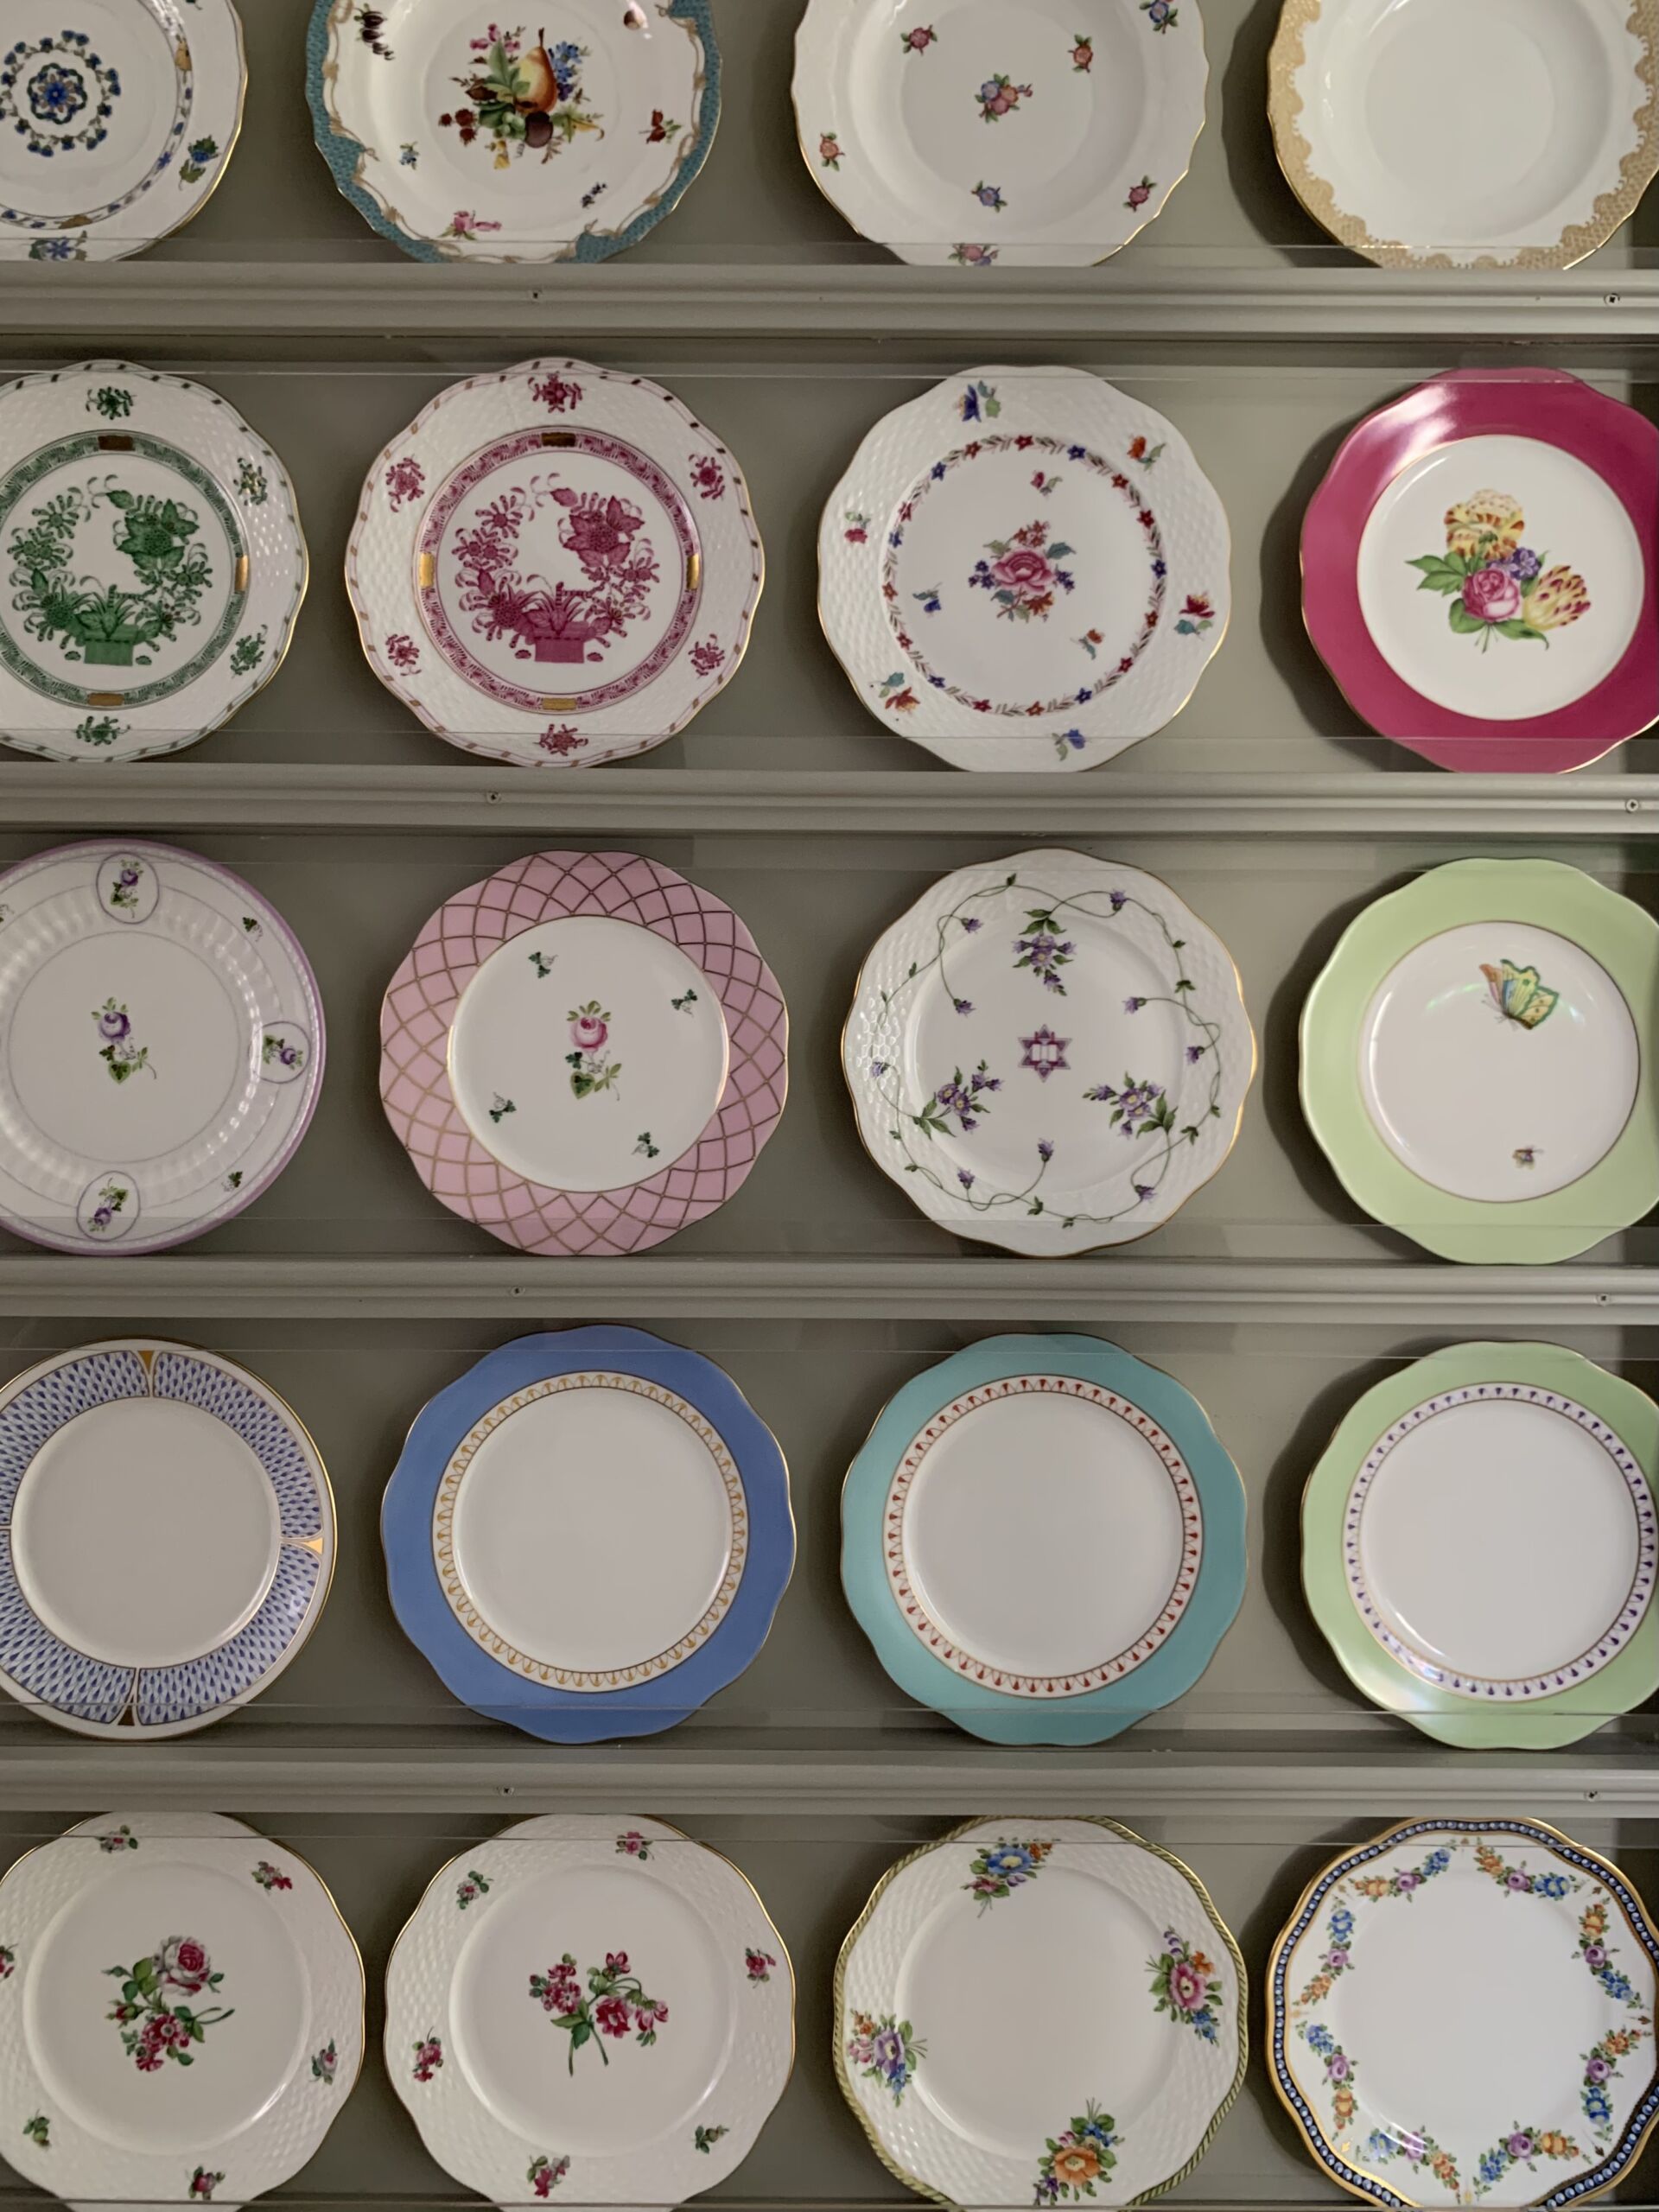 Beautiful Herend wall plates at the Herend Museum